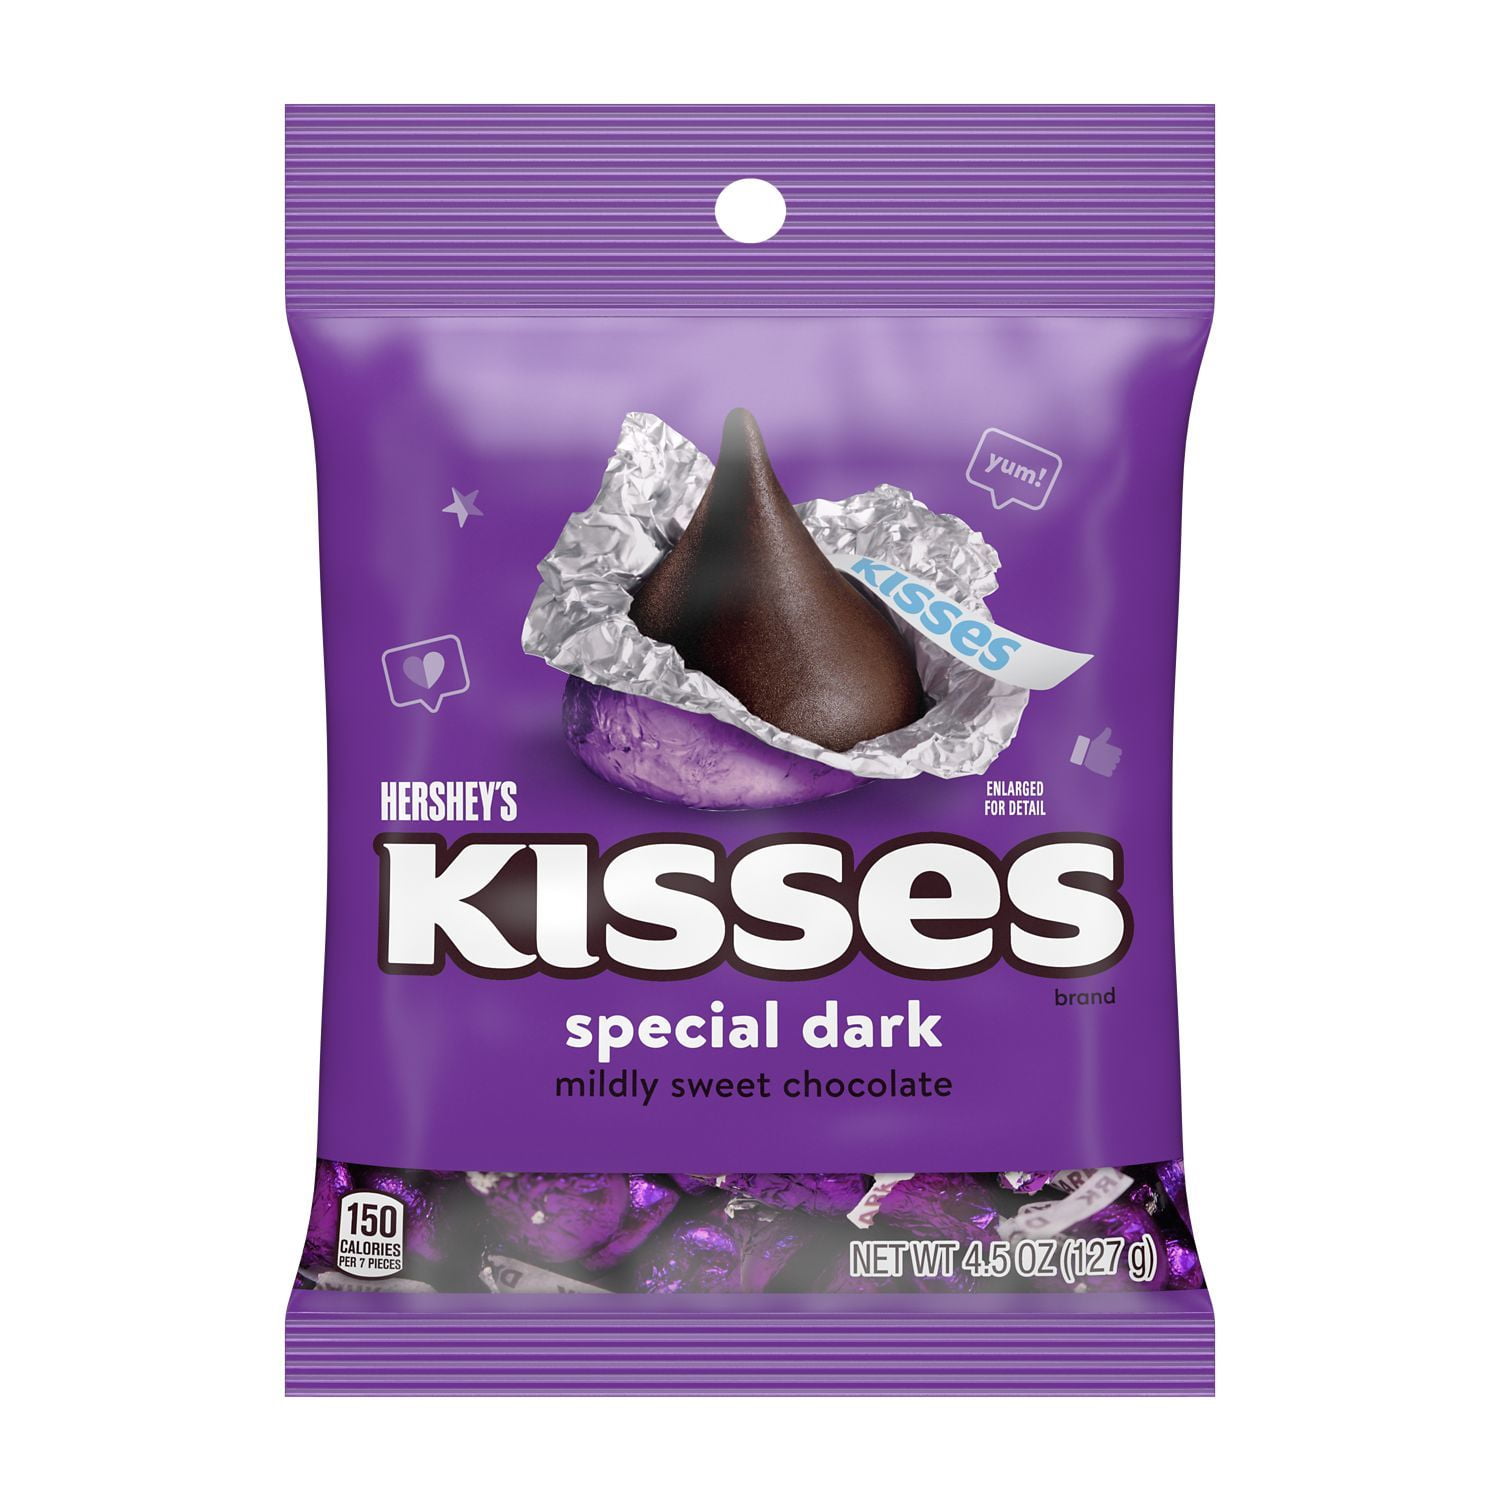 Hershey's Kisses Special Dark Mildly Sweet Chocolate Candy, Individually Wrapped, 4.5 oz Bag